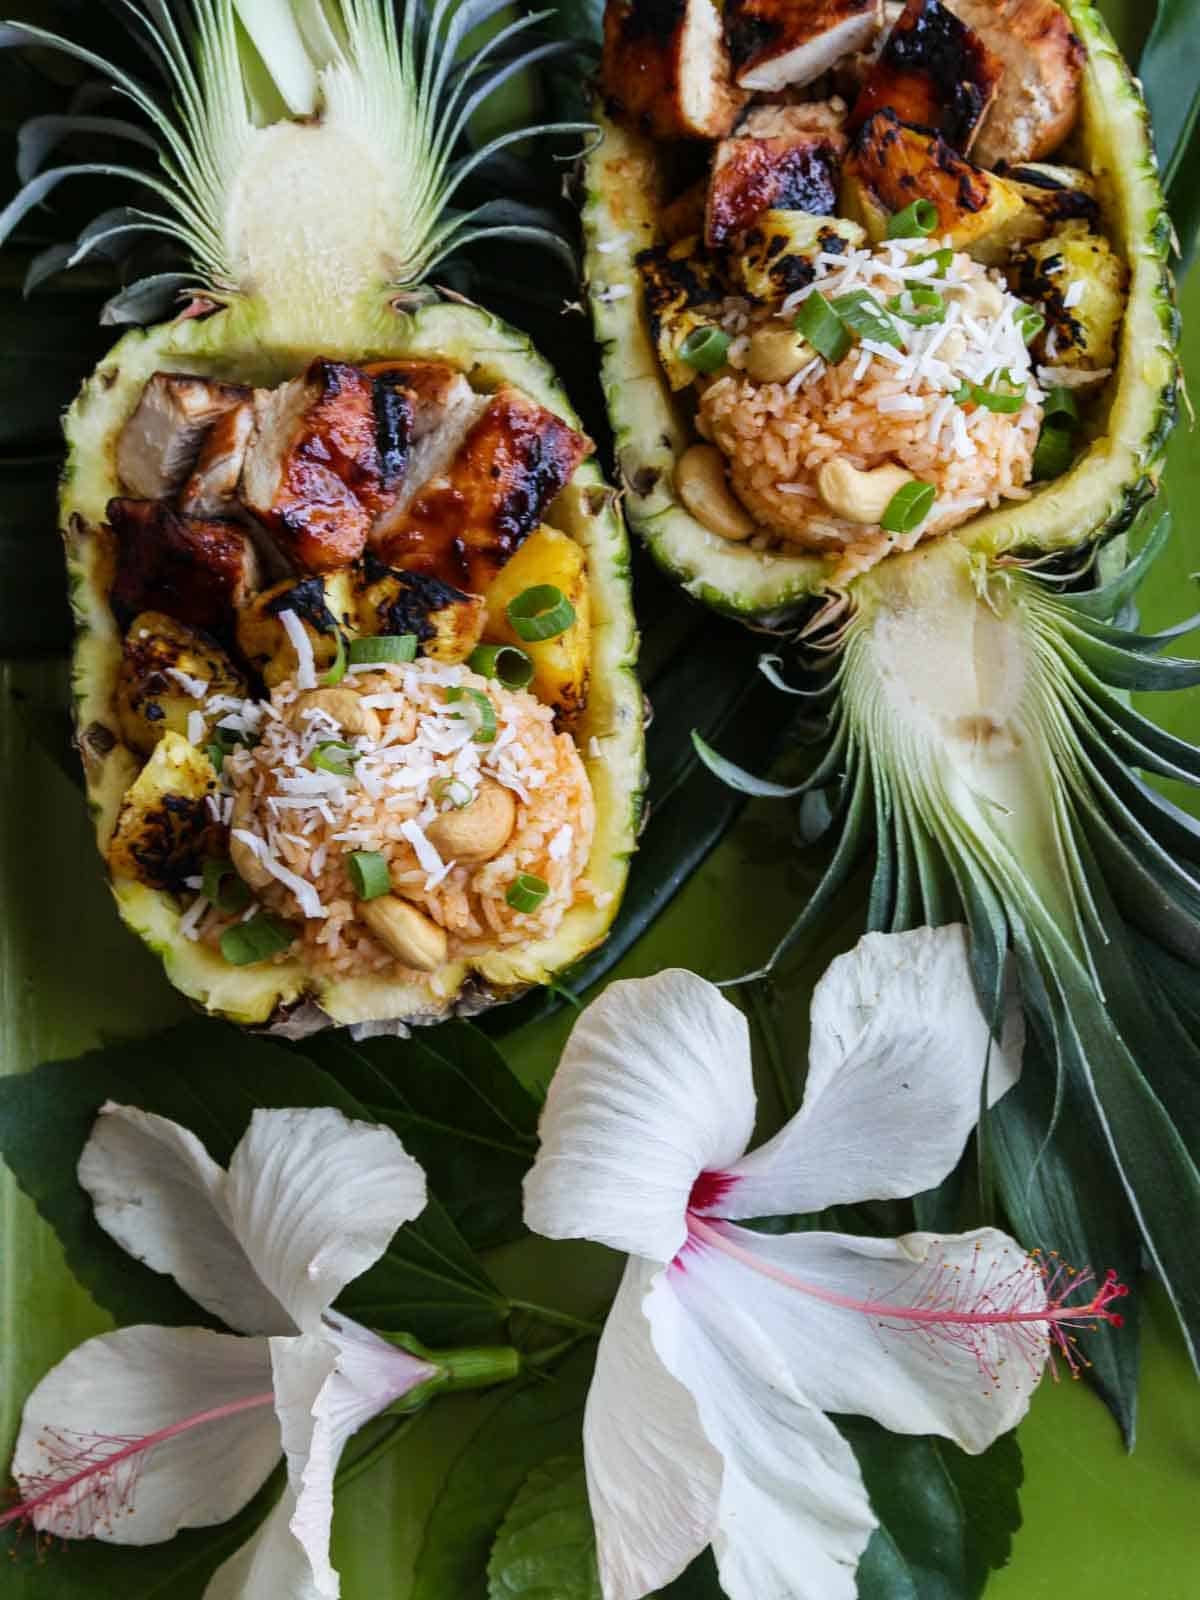 https://www.delicioustable.com/wp-content/uploads/2022/02/Two-Huli-huli-chicken-pineapple-bowls.jpg